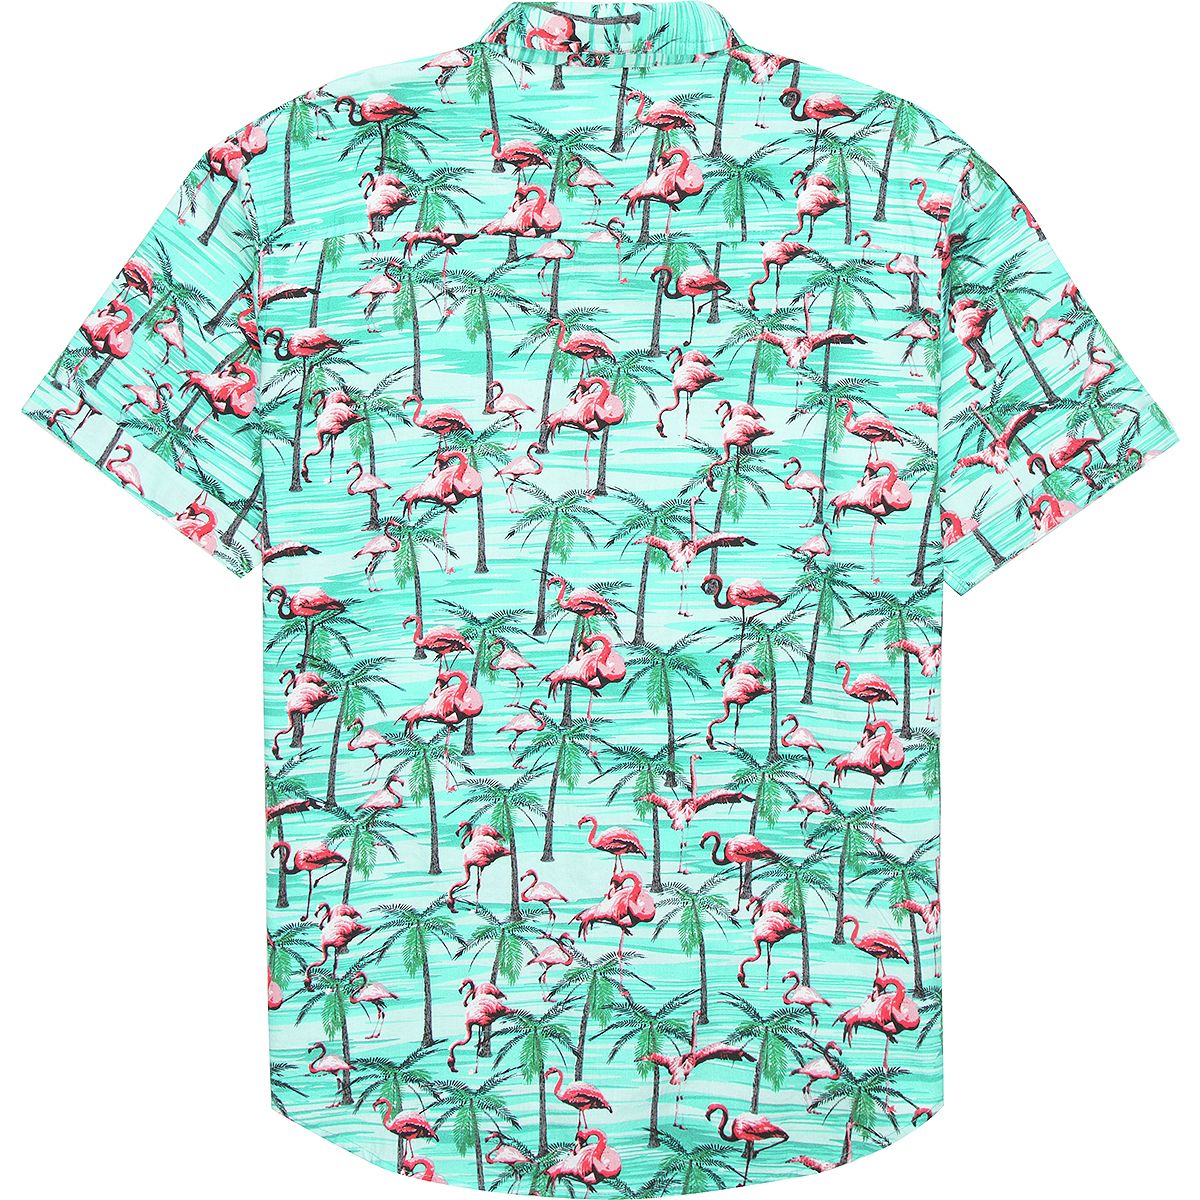 Stoic Birds of a Feather Shirt - Men's - Clothing